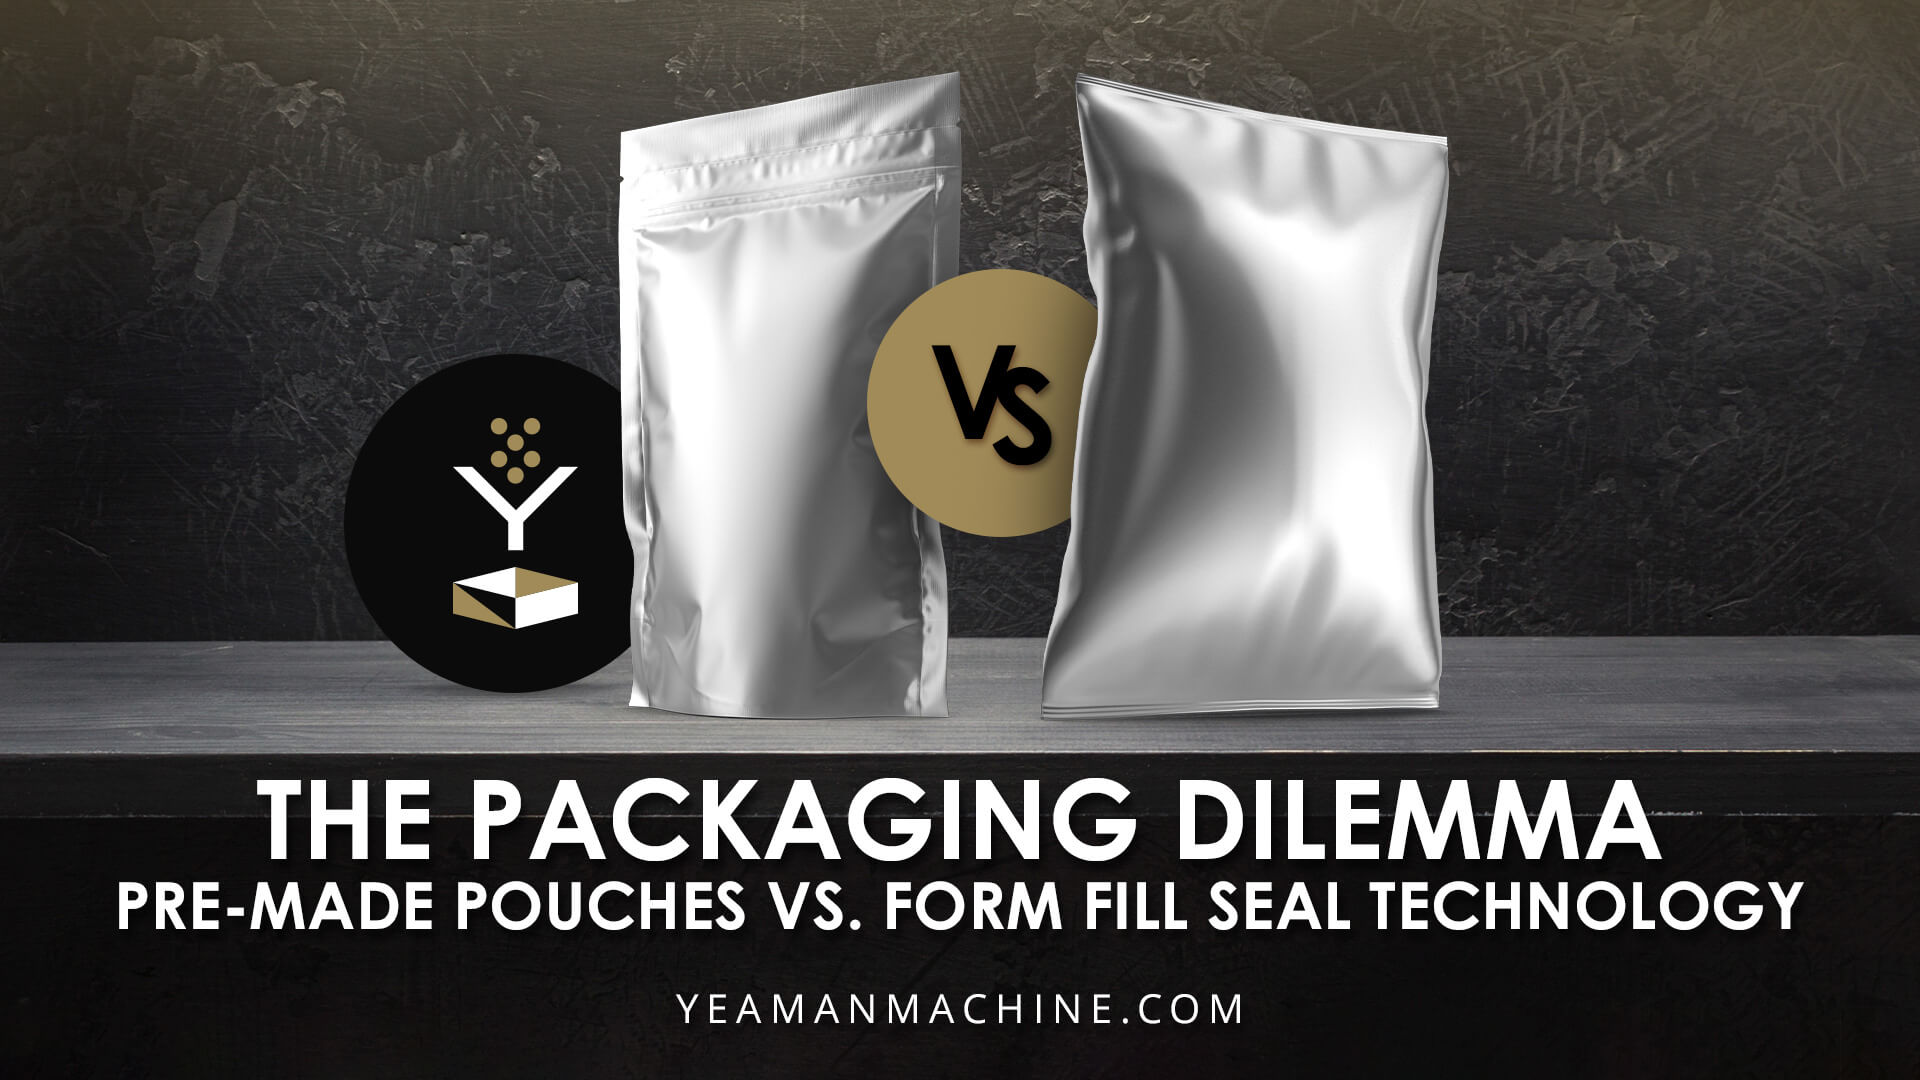 The Packaging Dilemma: Pre-Made Pouches vs. Form Fill Seal Technology